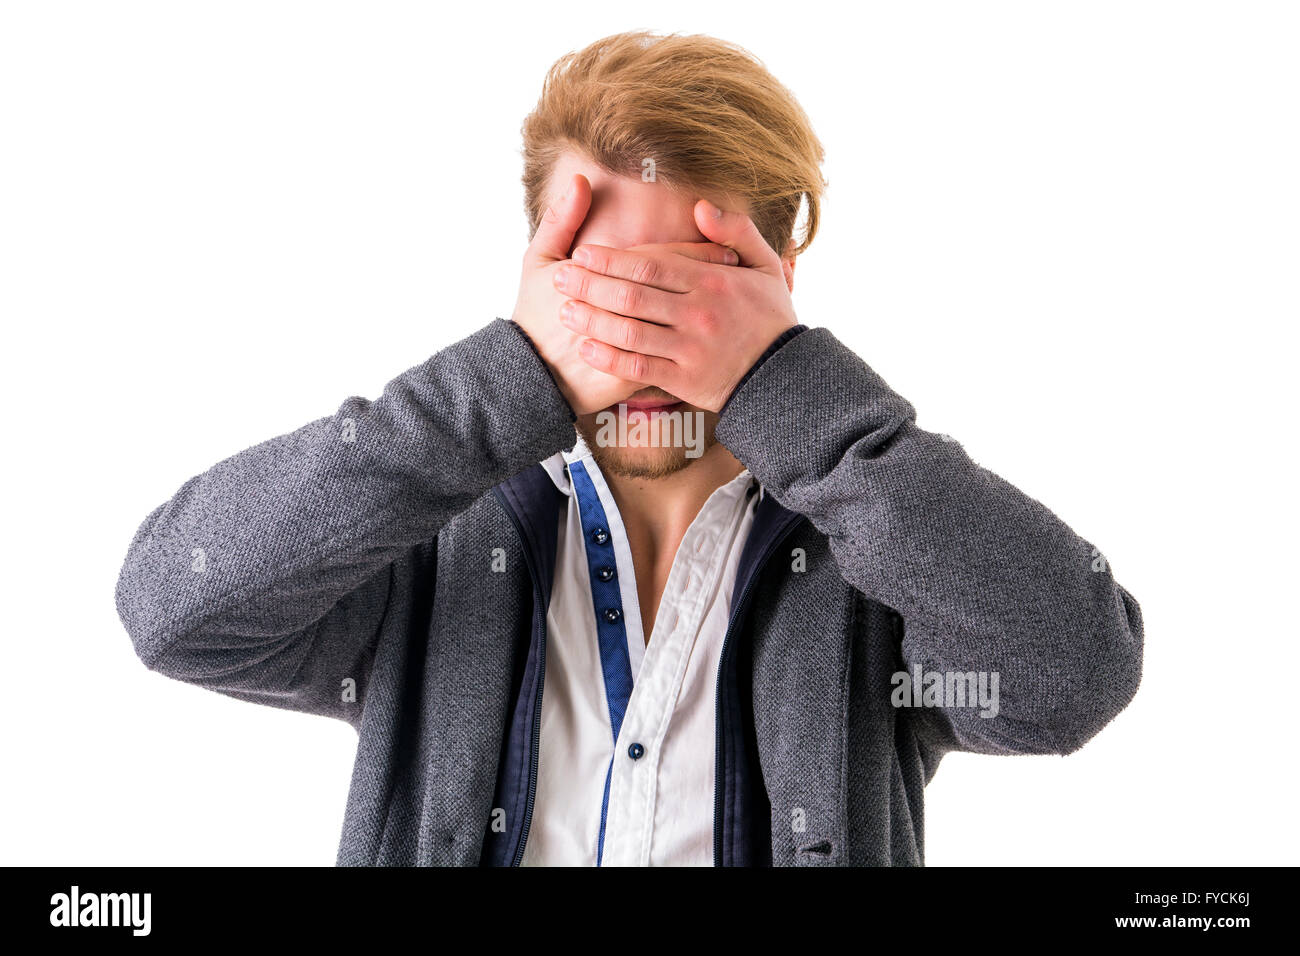 Young unrecognizable man with blond hair covering eyes with hands.White background.Isolated Stock Photo